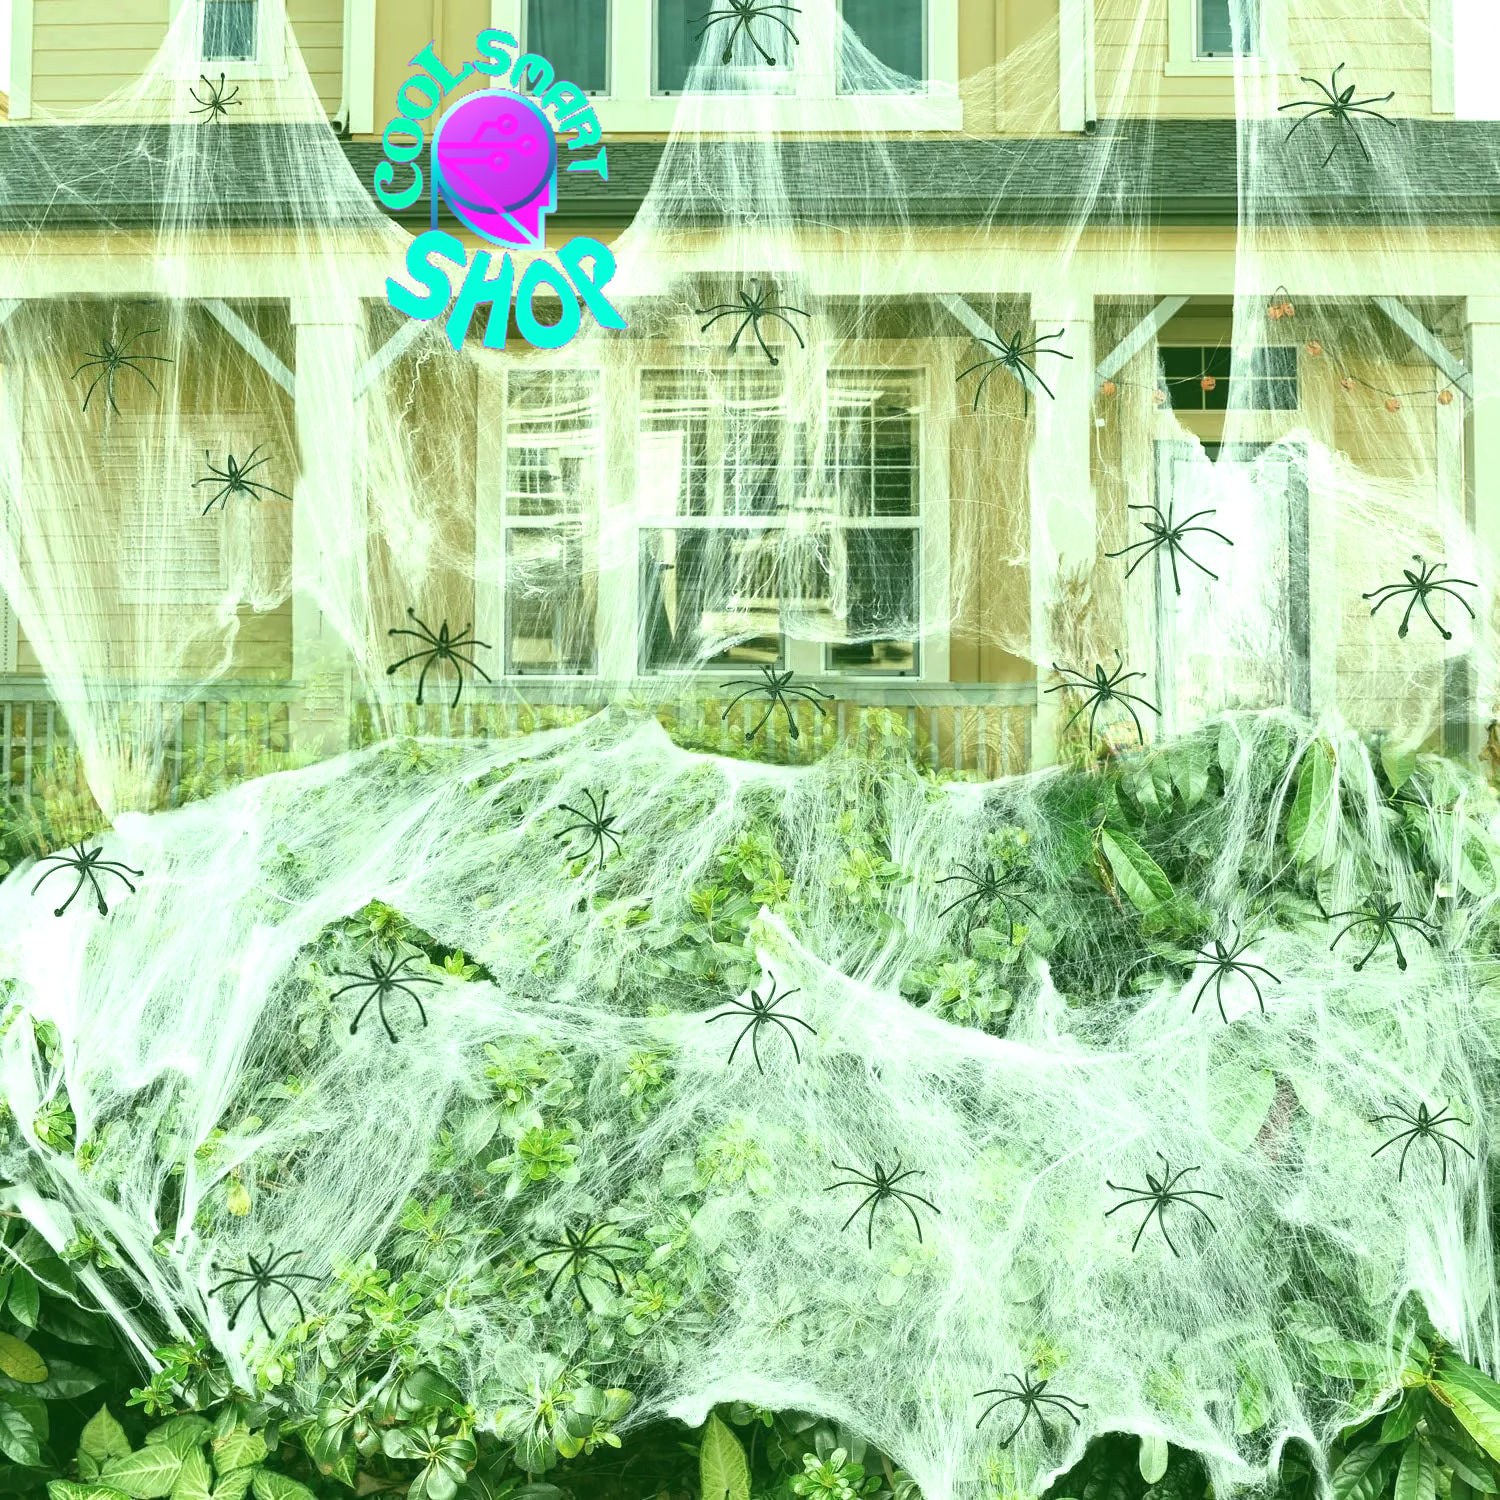 Halloween Decoration Artificial Spider Web Spider Cotton Thread Web Horror Props Haunted House Home Decoration Party Supplies